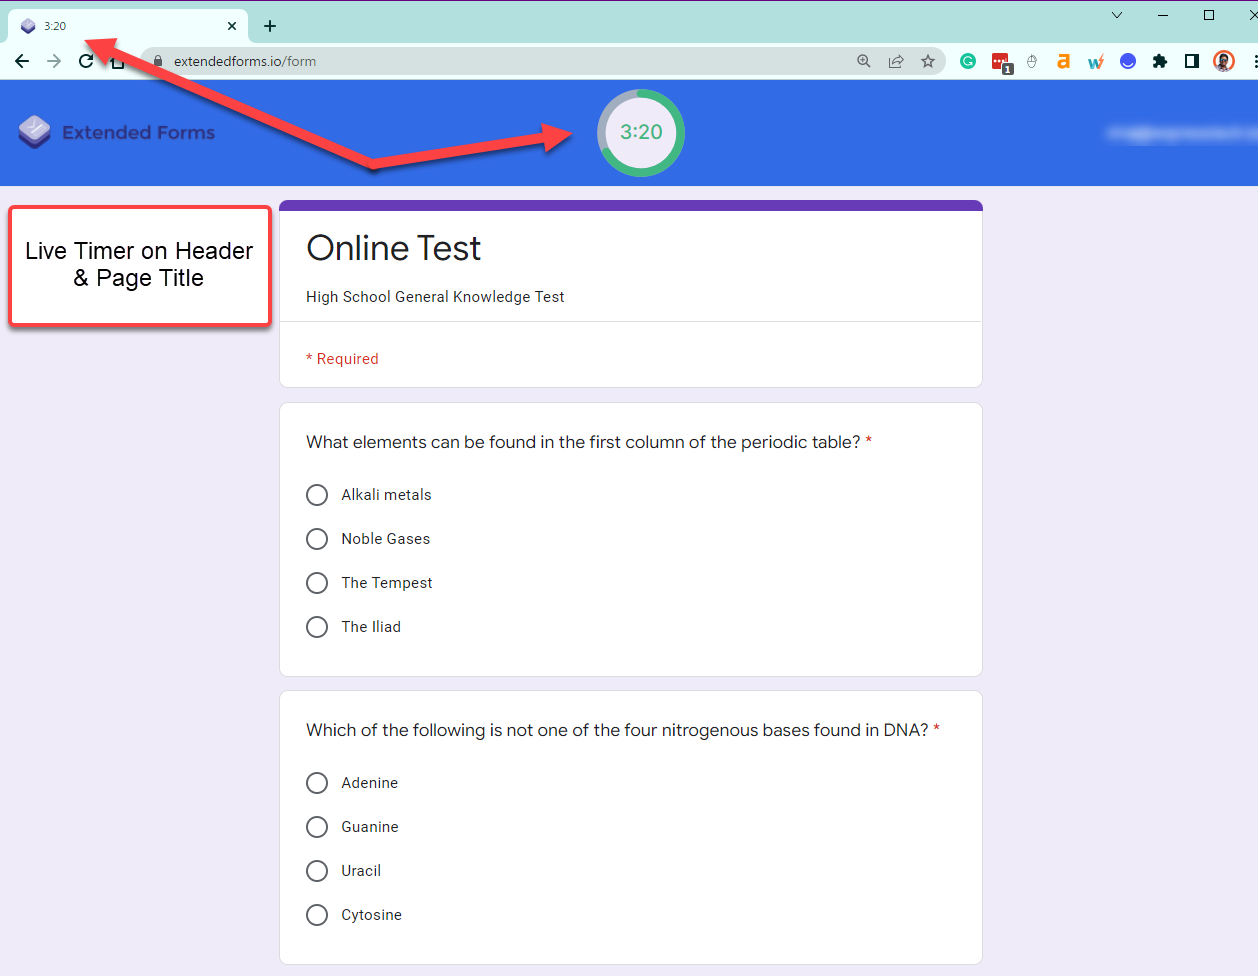 QSM - Extended Forms - Add a timer on Google Forms - Live Timer on Header and Page Title